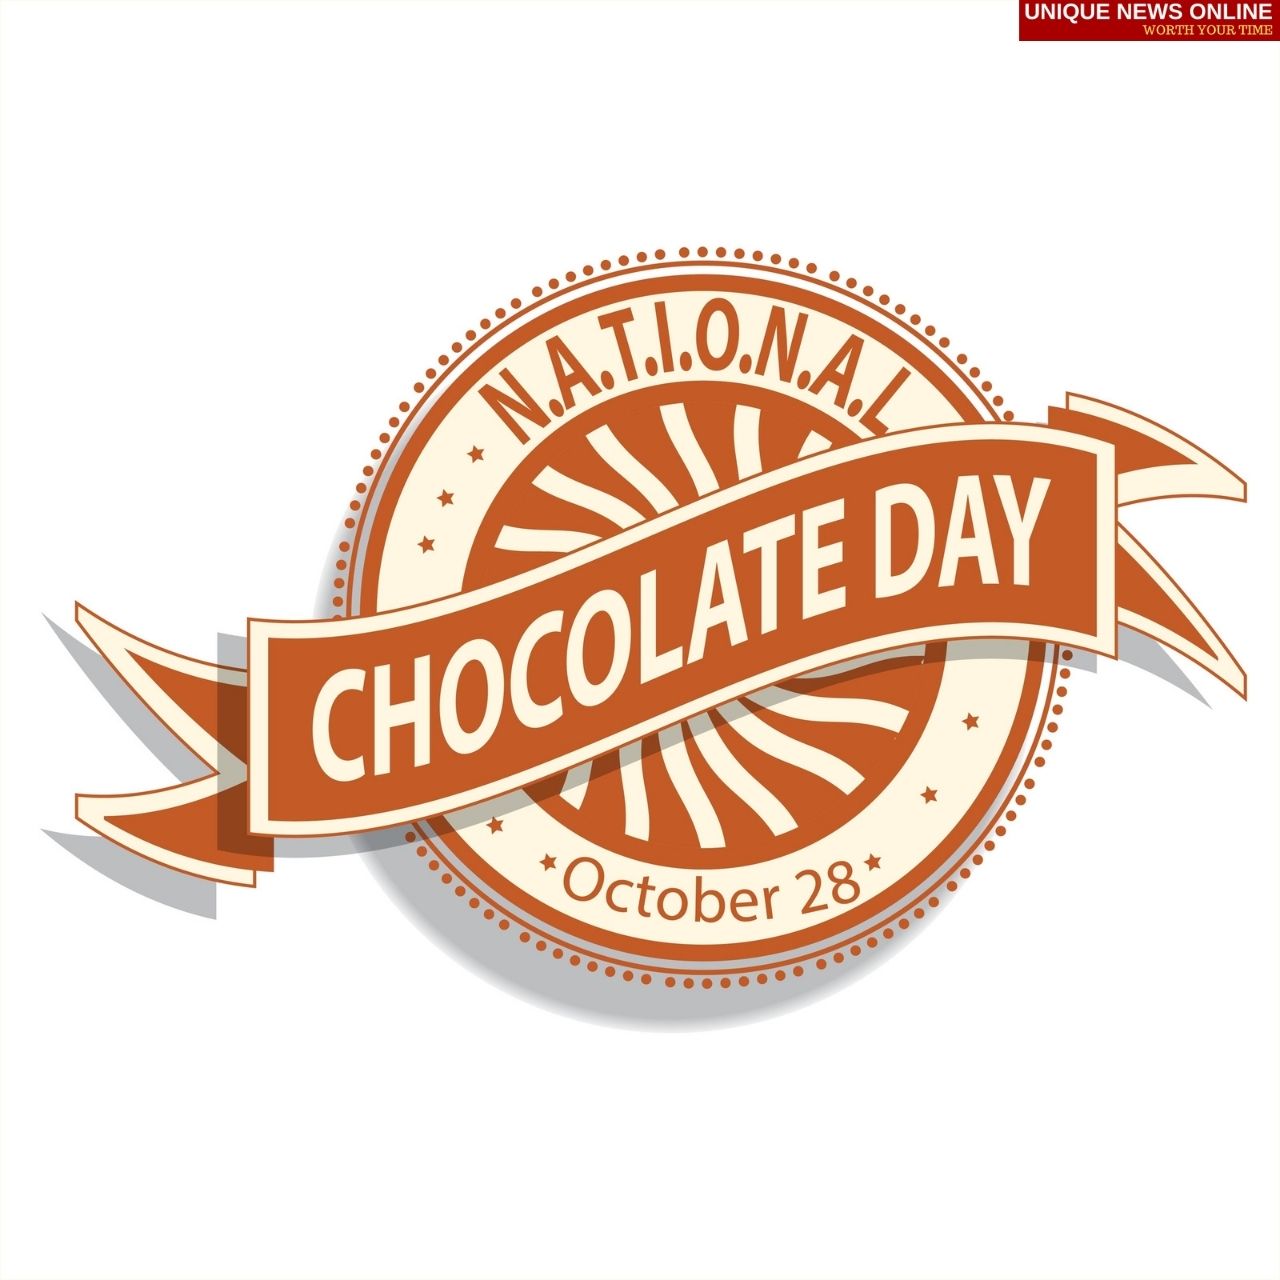 National Chocolate Day (USA) 2021 Quotes, Wishes, Sayings, HD Images, Meme, and Messages to Share